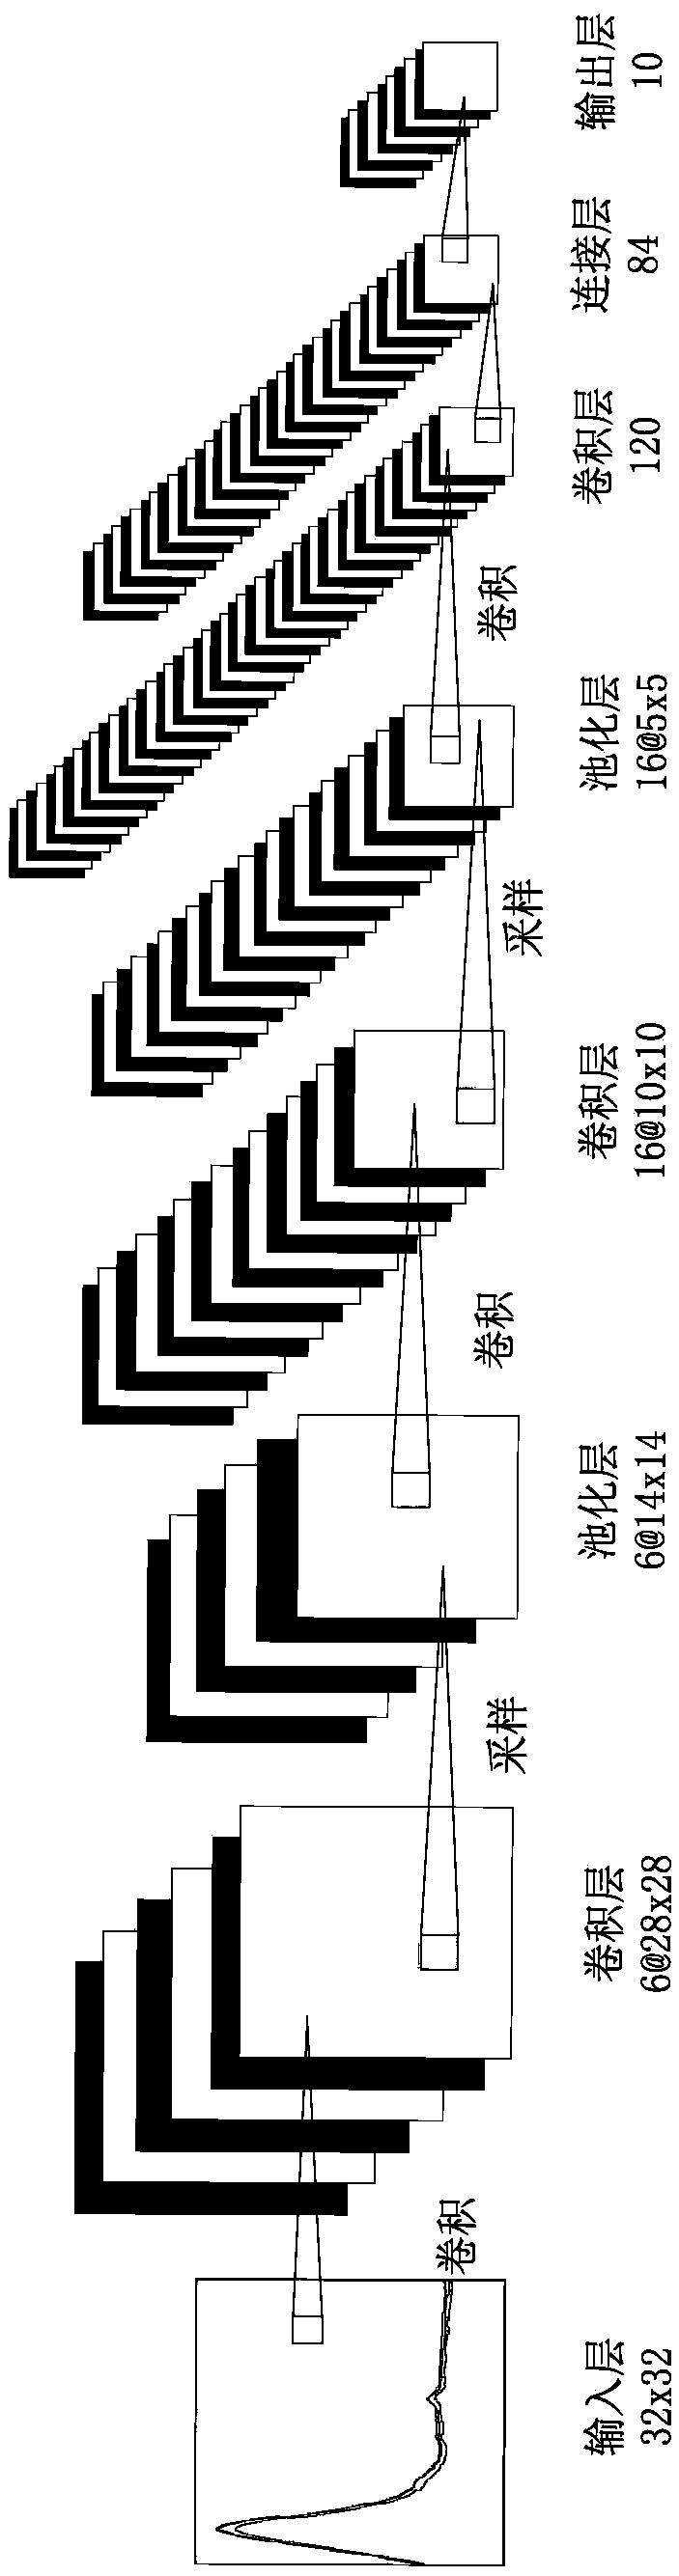 Tricholoma matsutake fast nondestructive testing system and method based on convolutional neural network